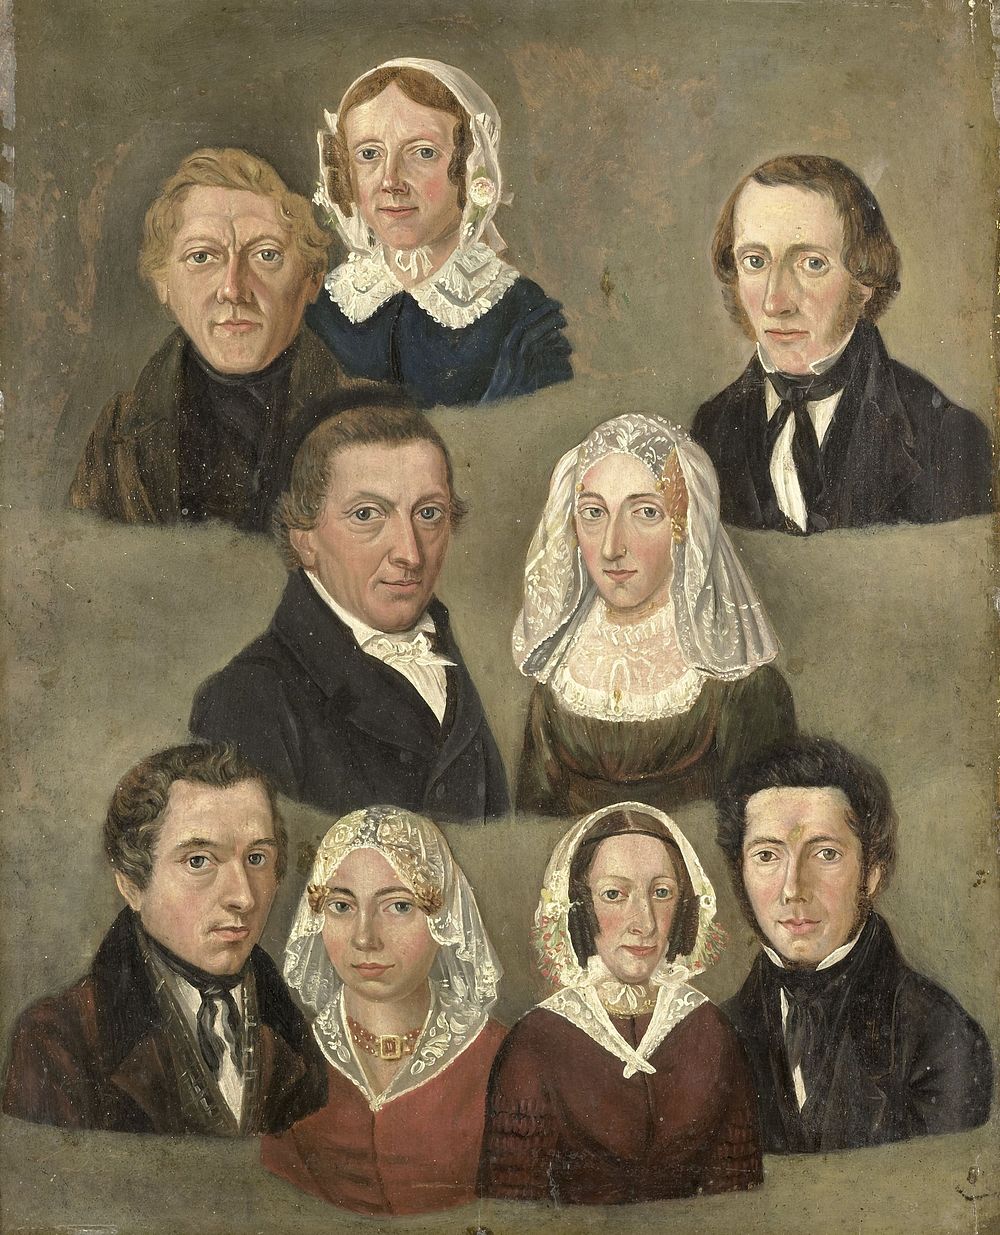 Portrait of the Artist's Parents, Douwe Martens Teenstra and Barber Hindriks Siccama with Members of the Family (1834) by…